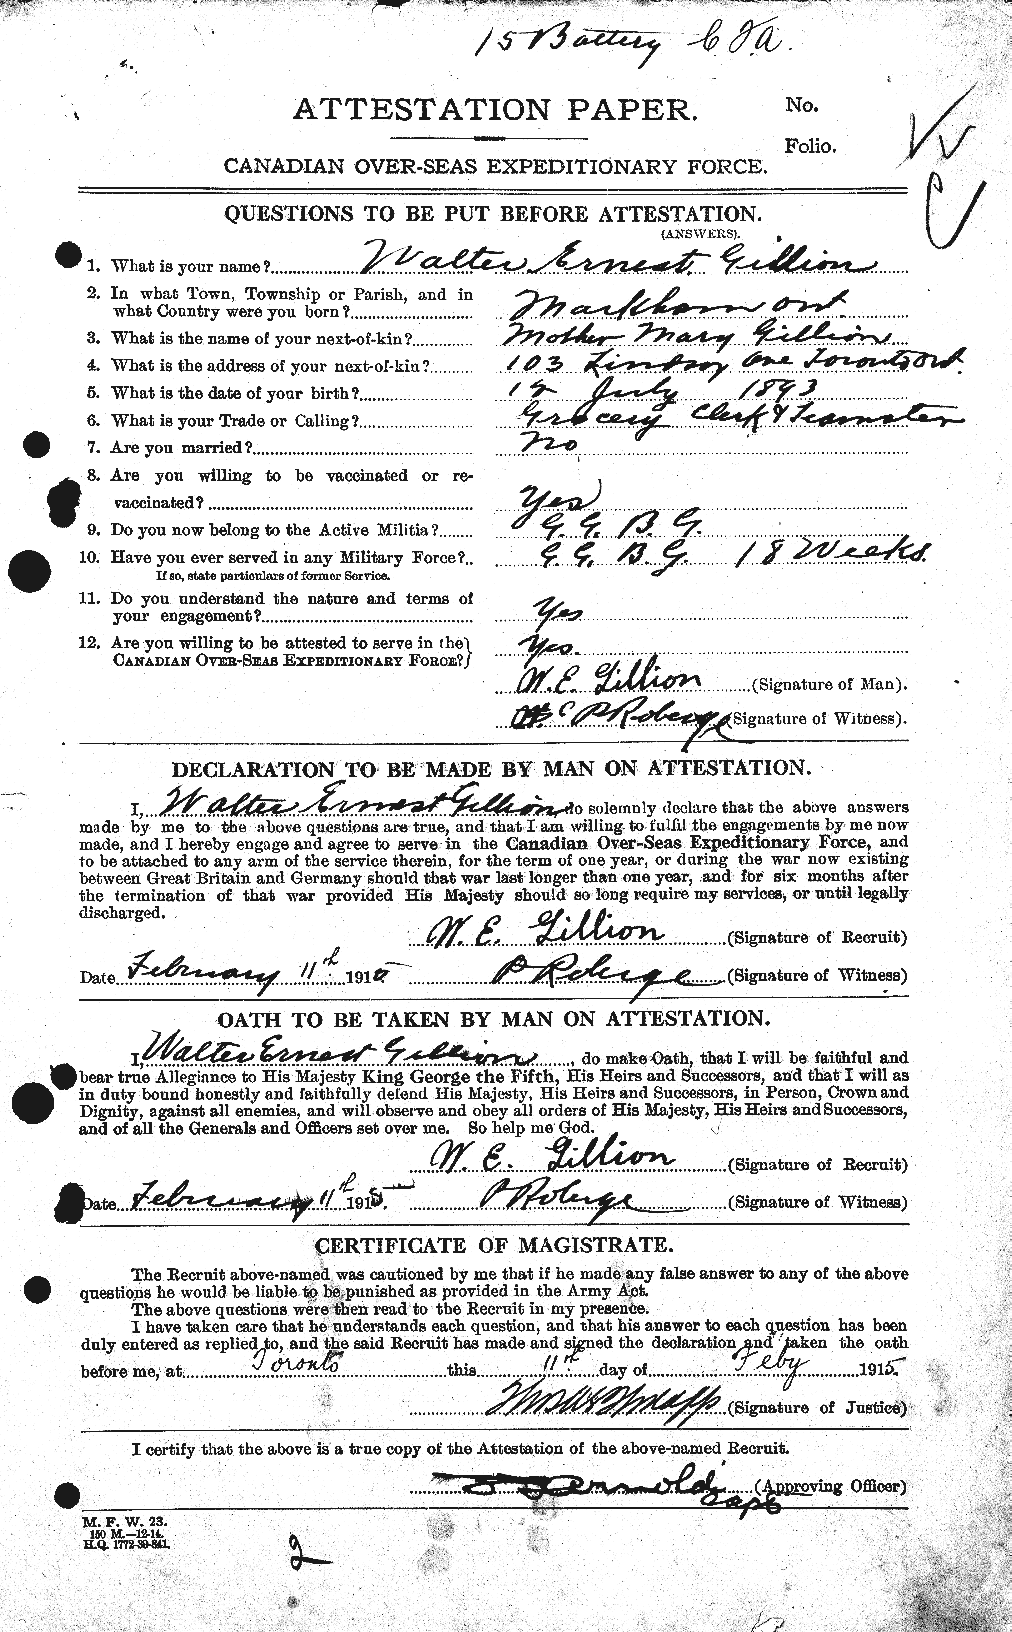 Personnel Records of the First World War - CEF 351665a